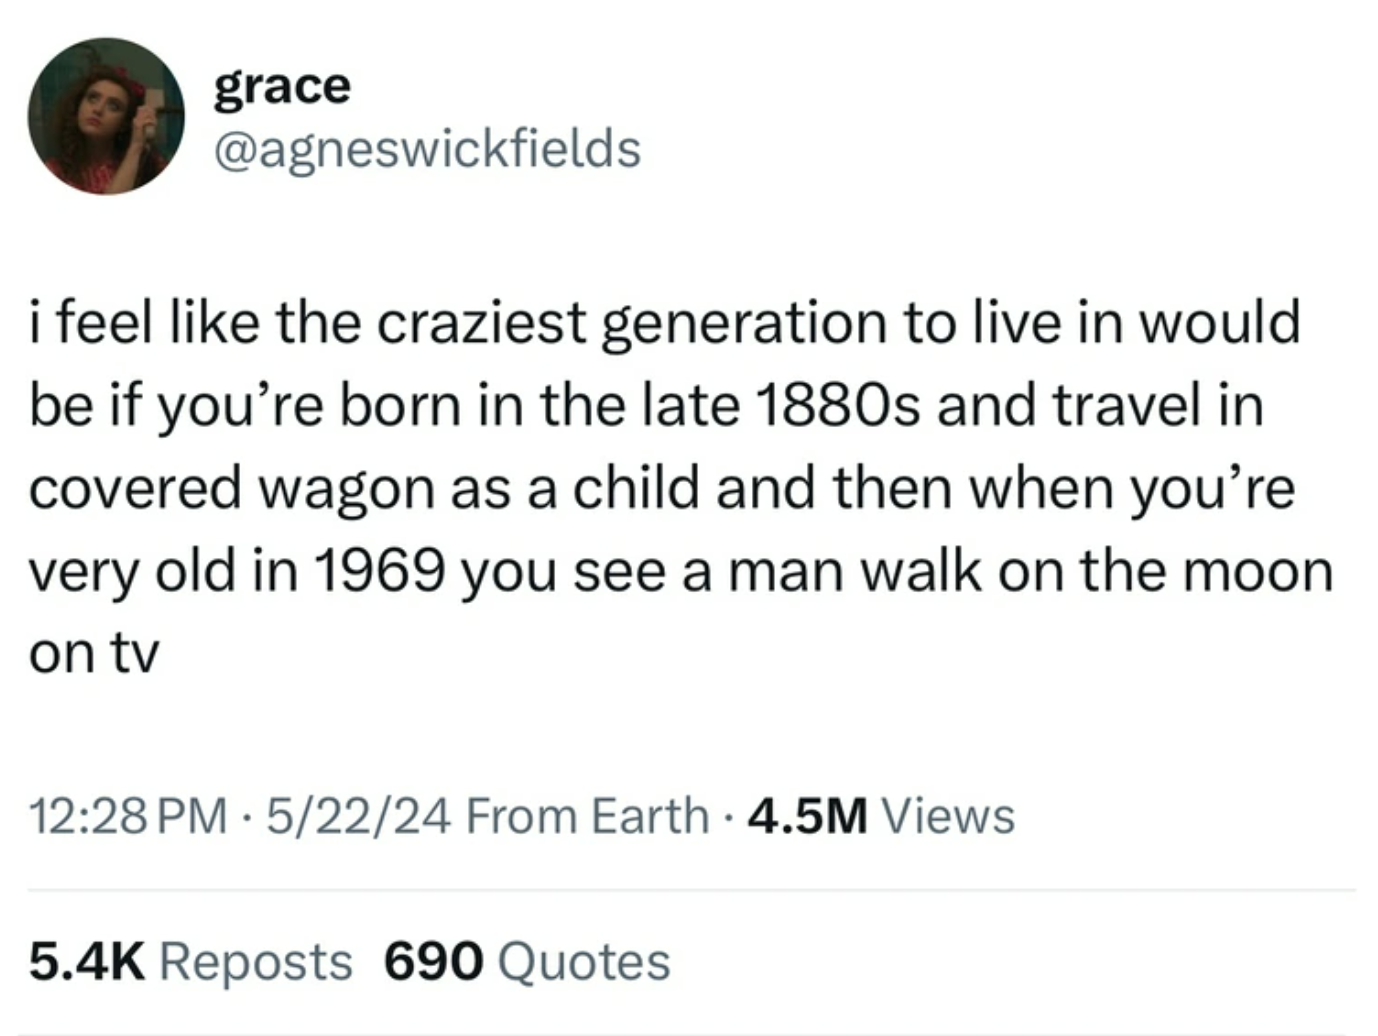 screenshot - grace i feel the craziest generation to live in would be if you're born in the late 1880s and travel in covered wagon as a child and then when you're very old in 1969 you see a man walk on the moon on tv 52224 From Earth 4.5M Views Reposts 69